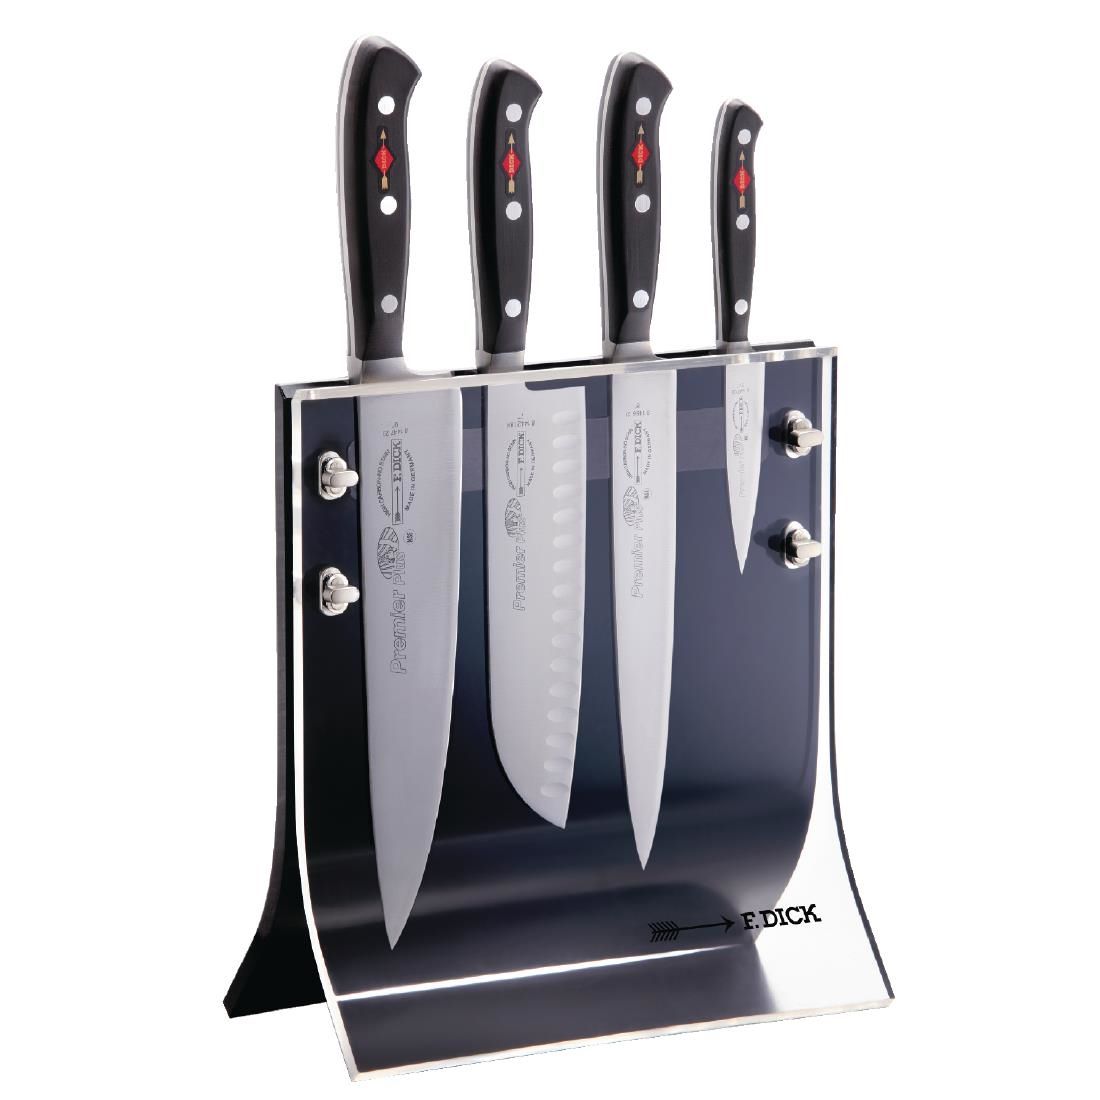 (Availability TBC) GD798 Dick Magnetic Knife Block 4 Slots JD Catering Equipment Solutions Ltd